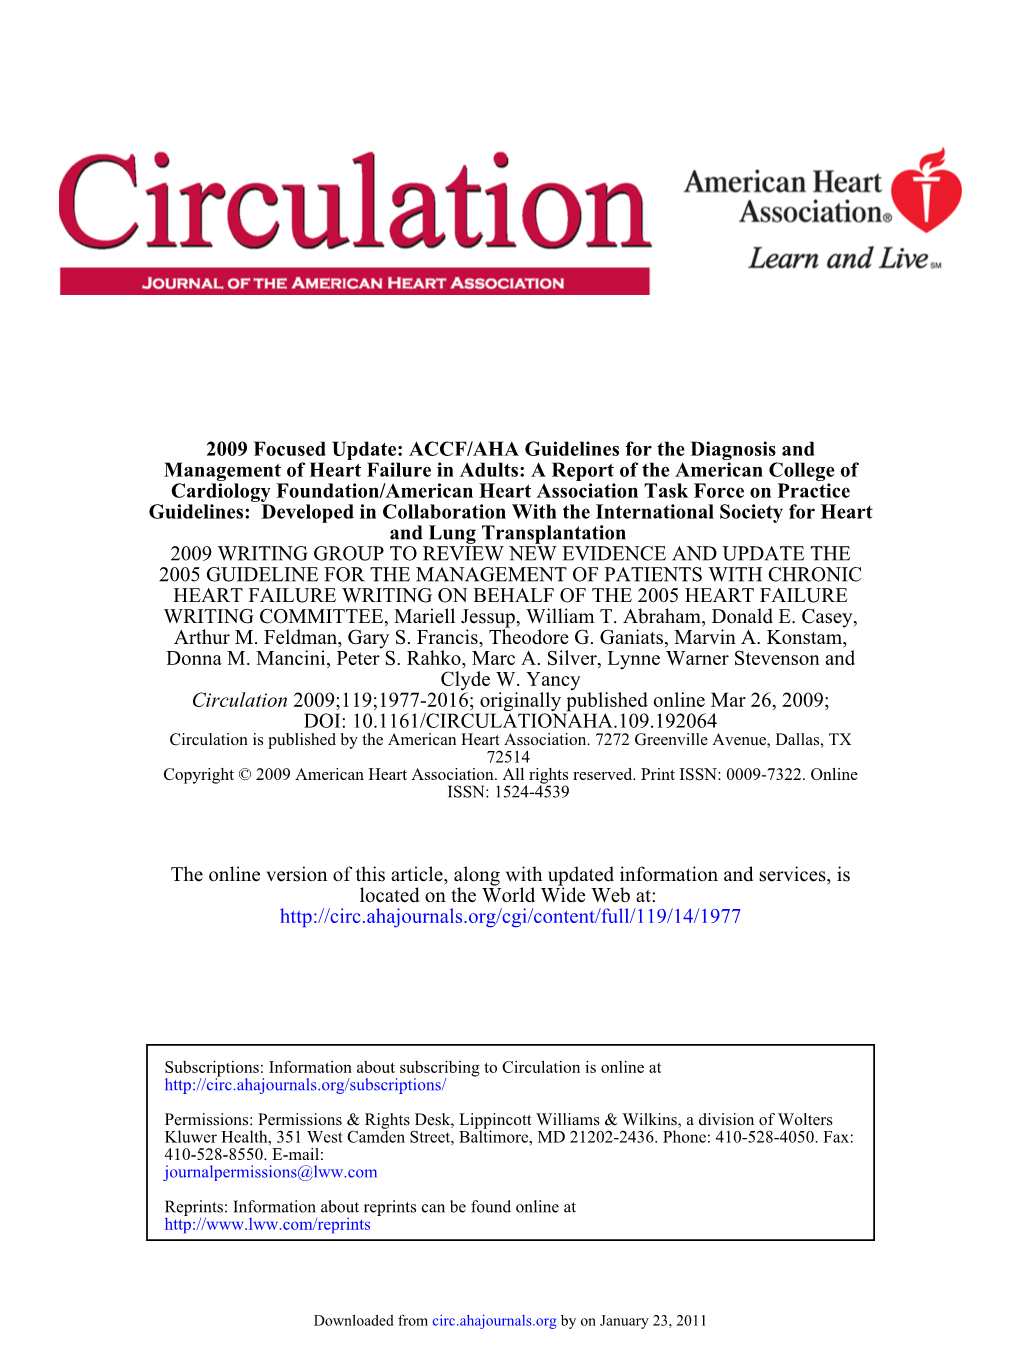 American Heart Associations Guideline for Diagnosis and Management of Heart Failure